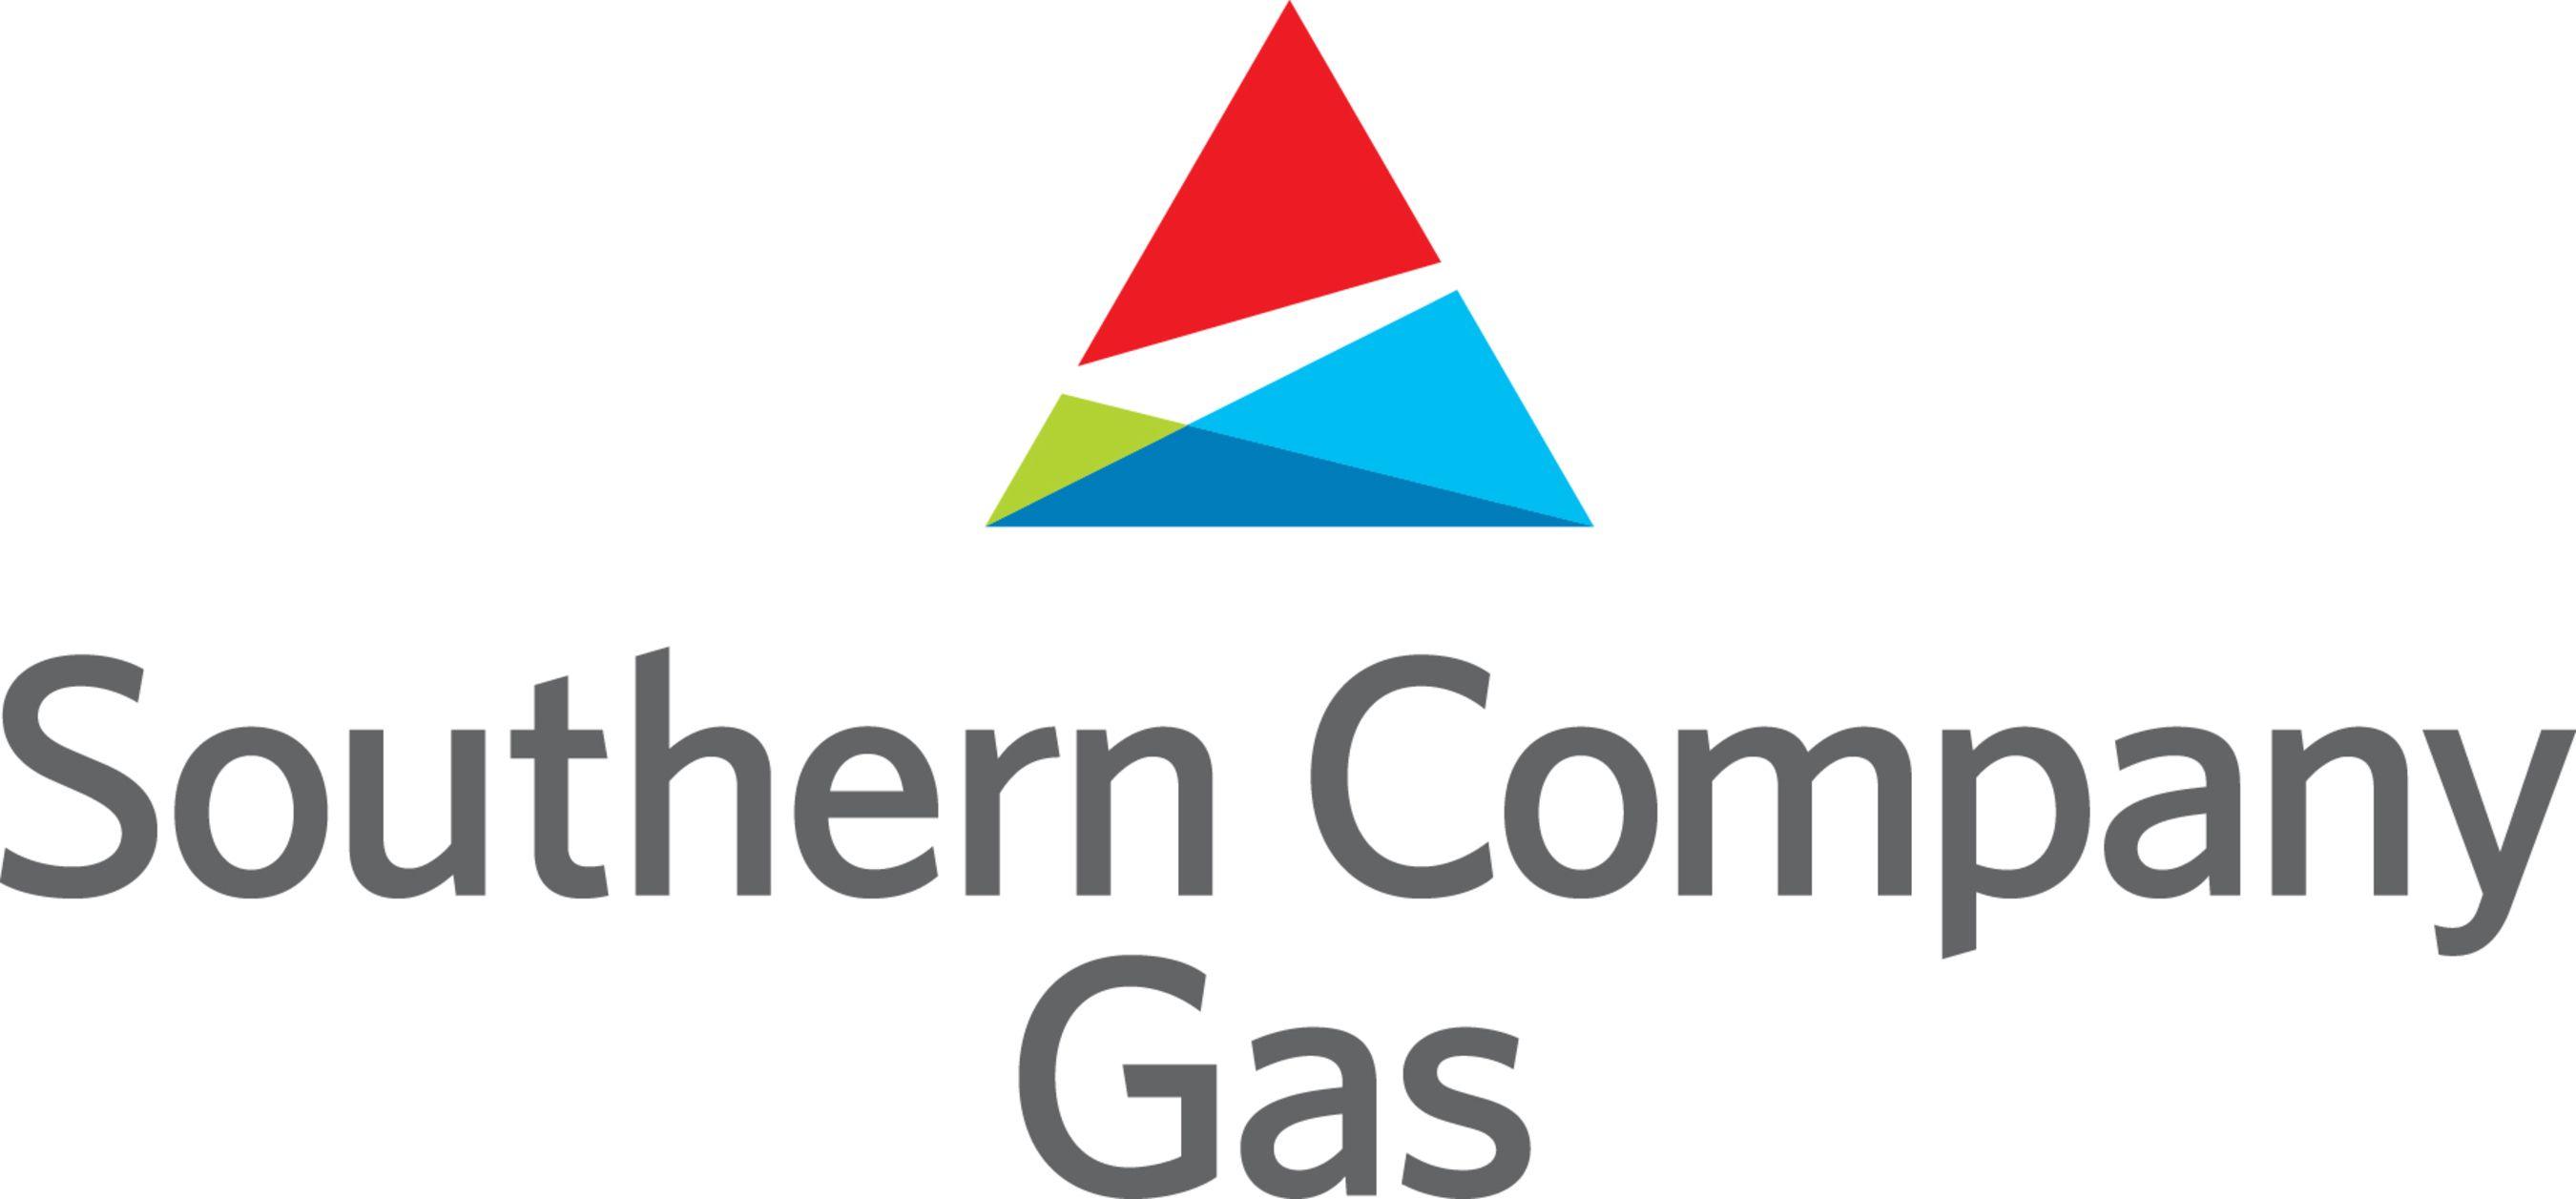 Southern Company Logo - Southern Company, AGL Resources receive merger approval from Georgia ...